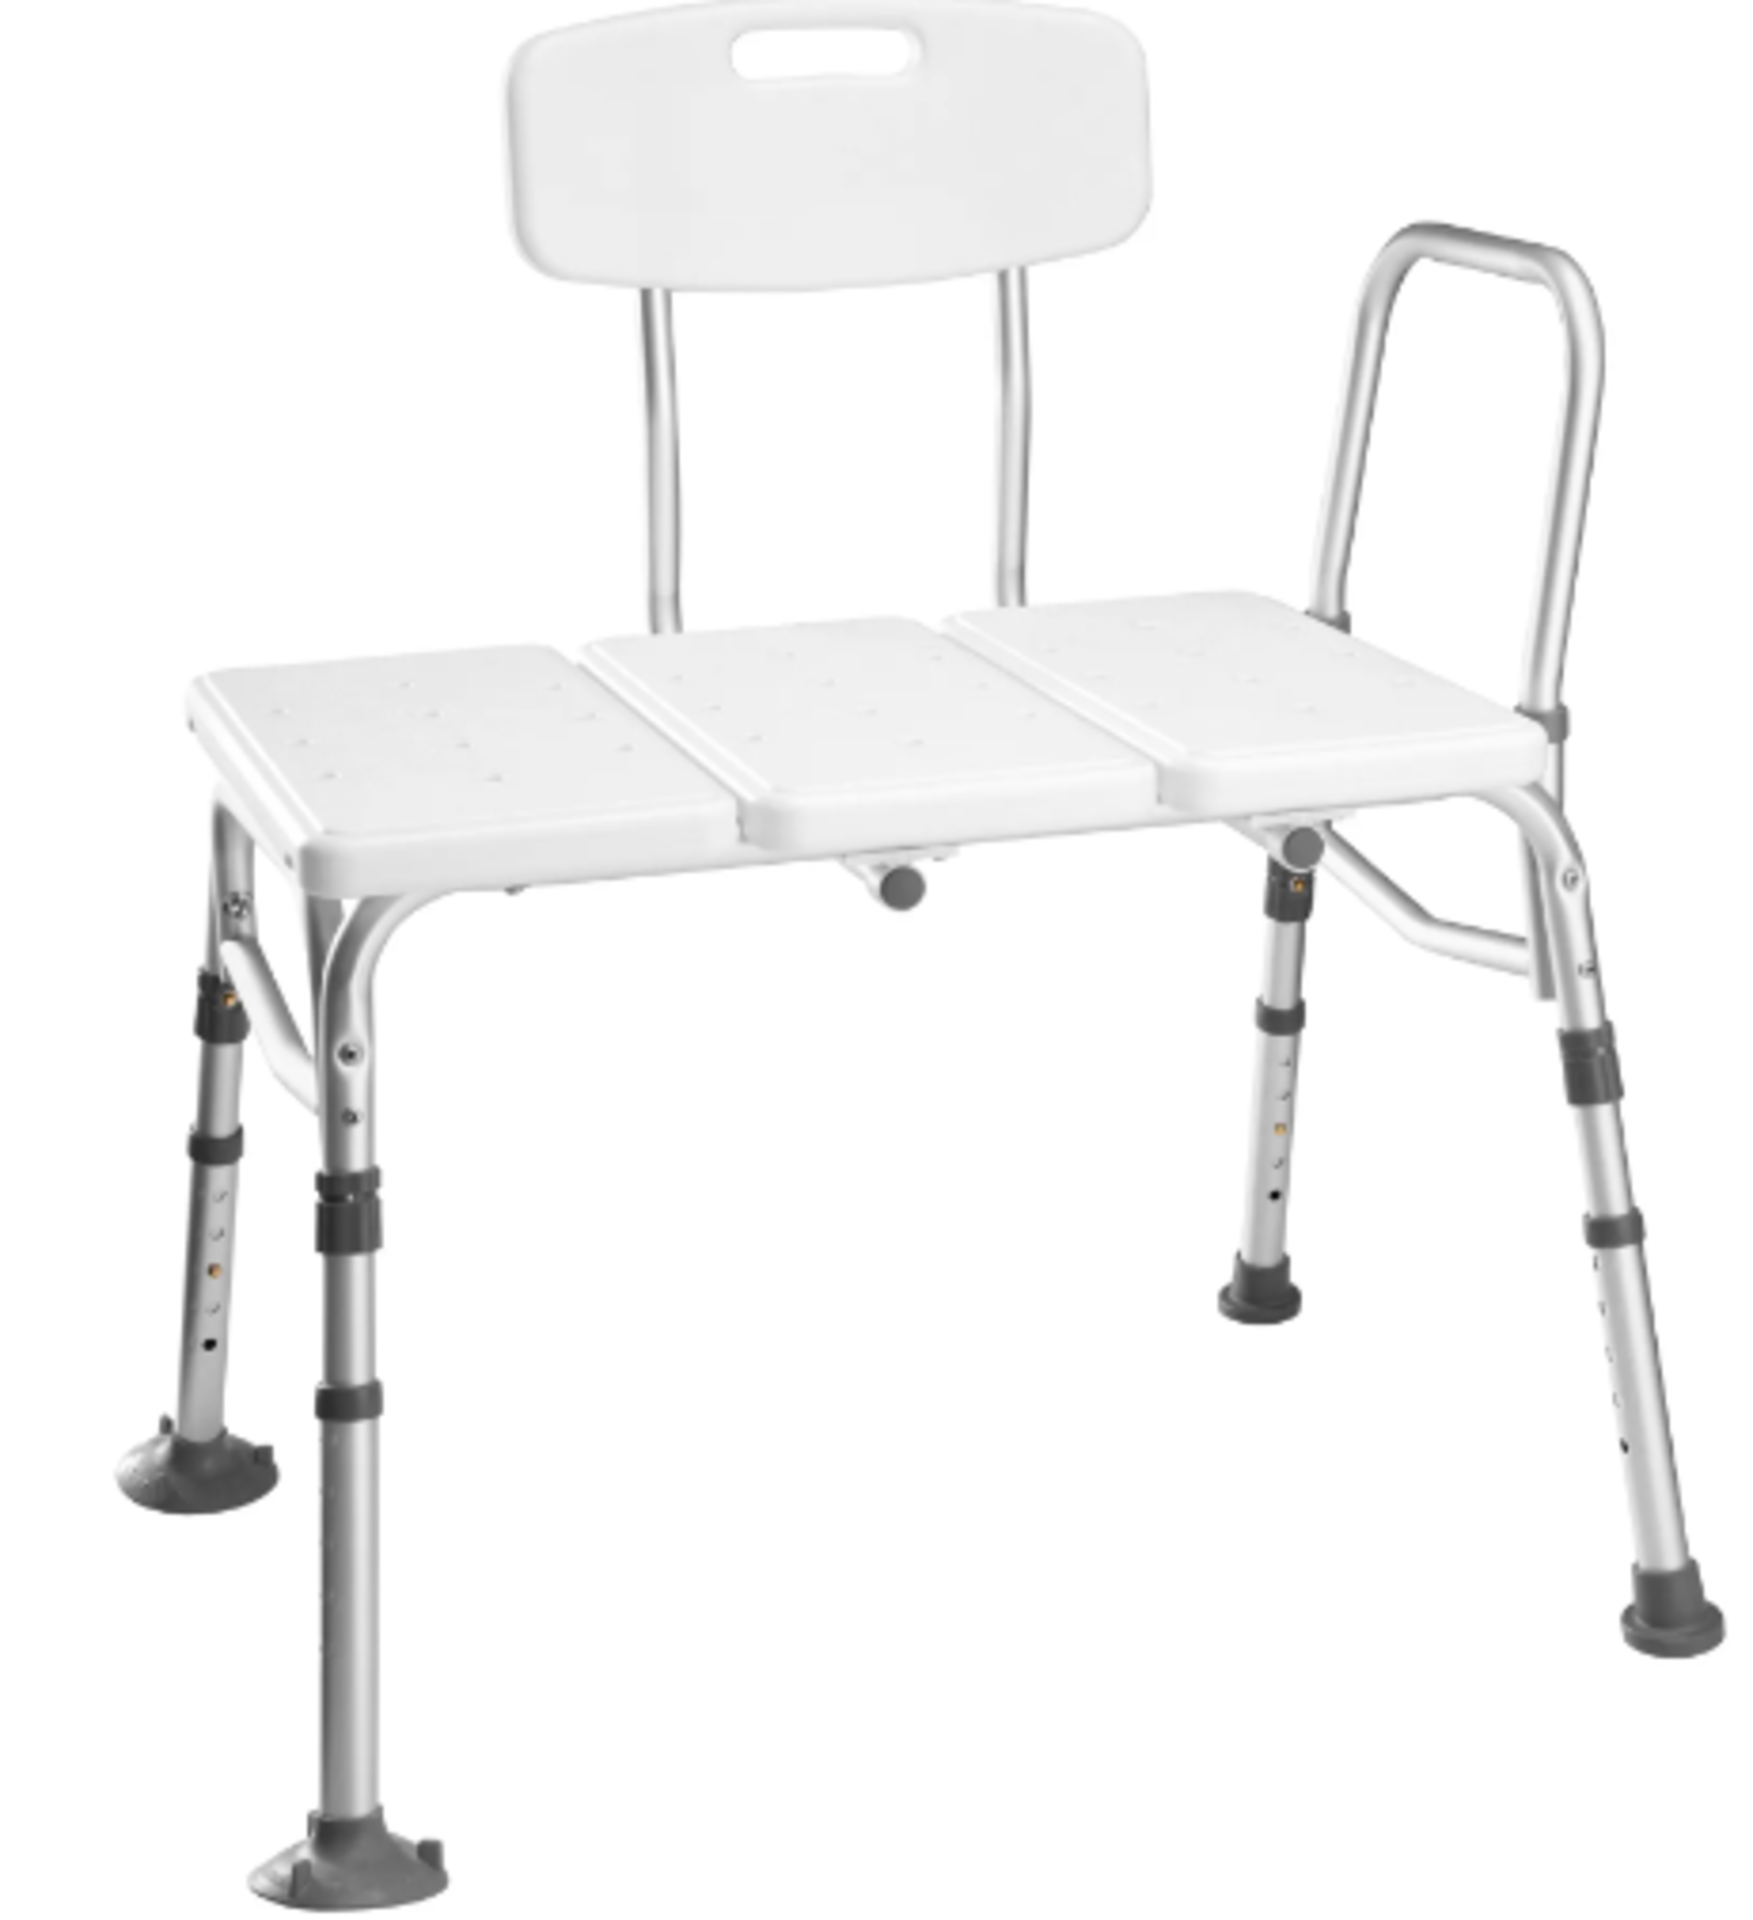 Tectake - Bath Seat With Back- And Armrest Adjustable Height White - Unchecked & Boxed. RRP £92.99